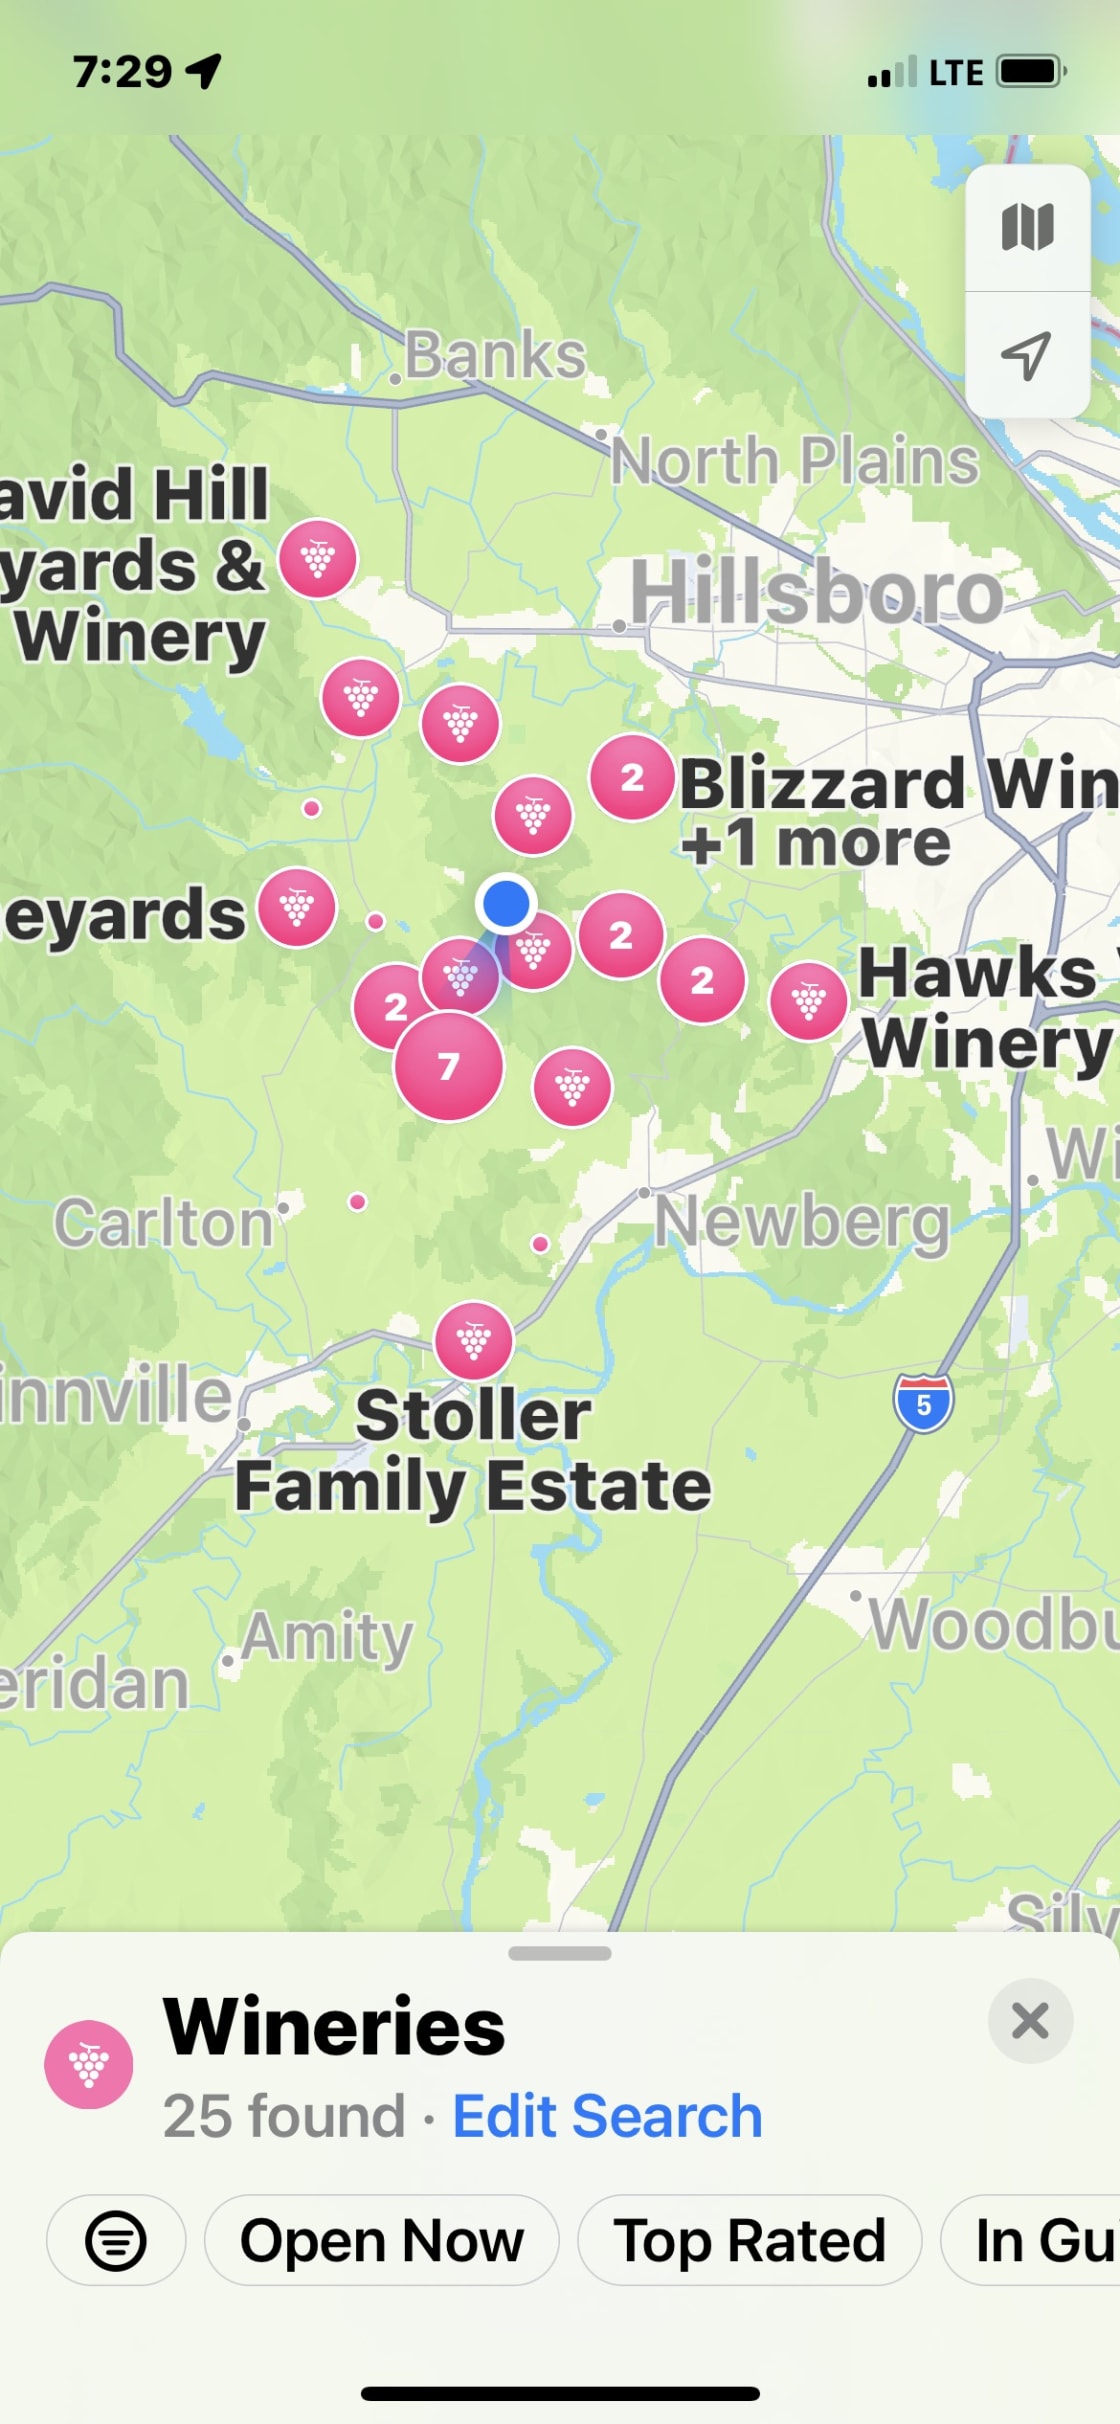 This shows a general location of our property and a few of the wineries nearby. 